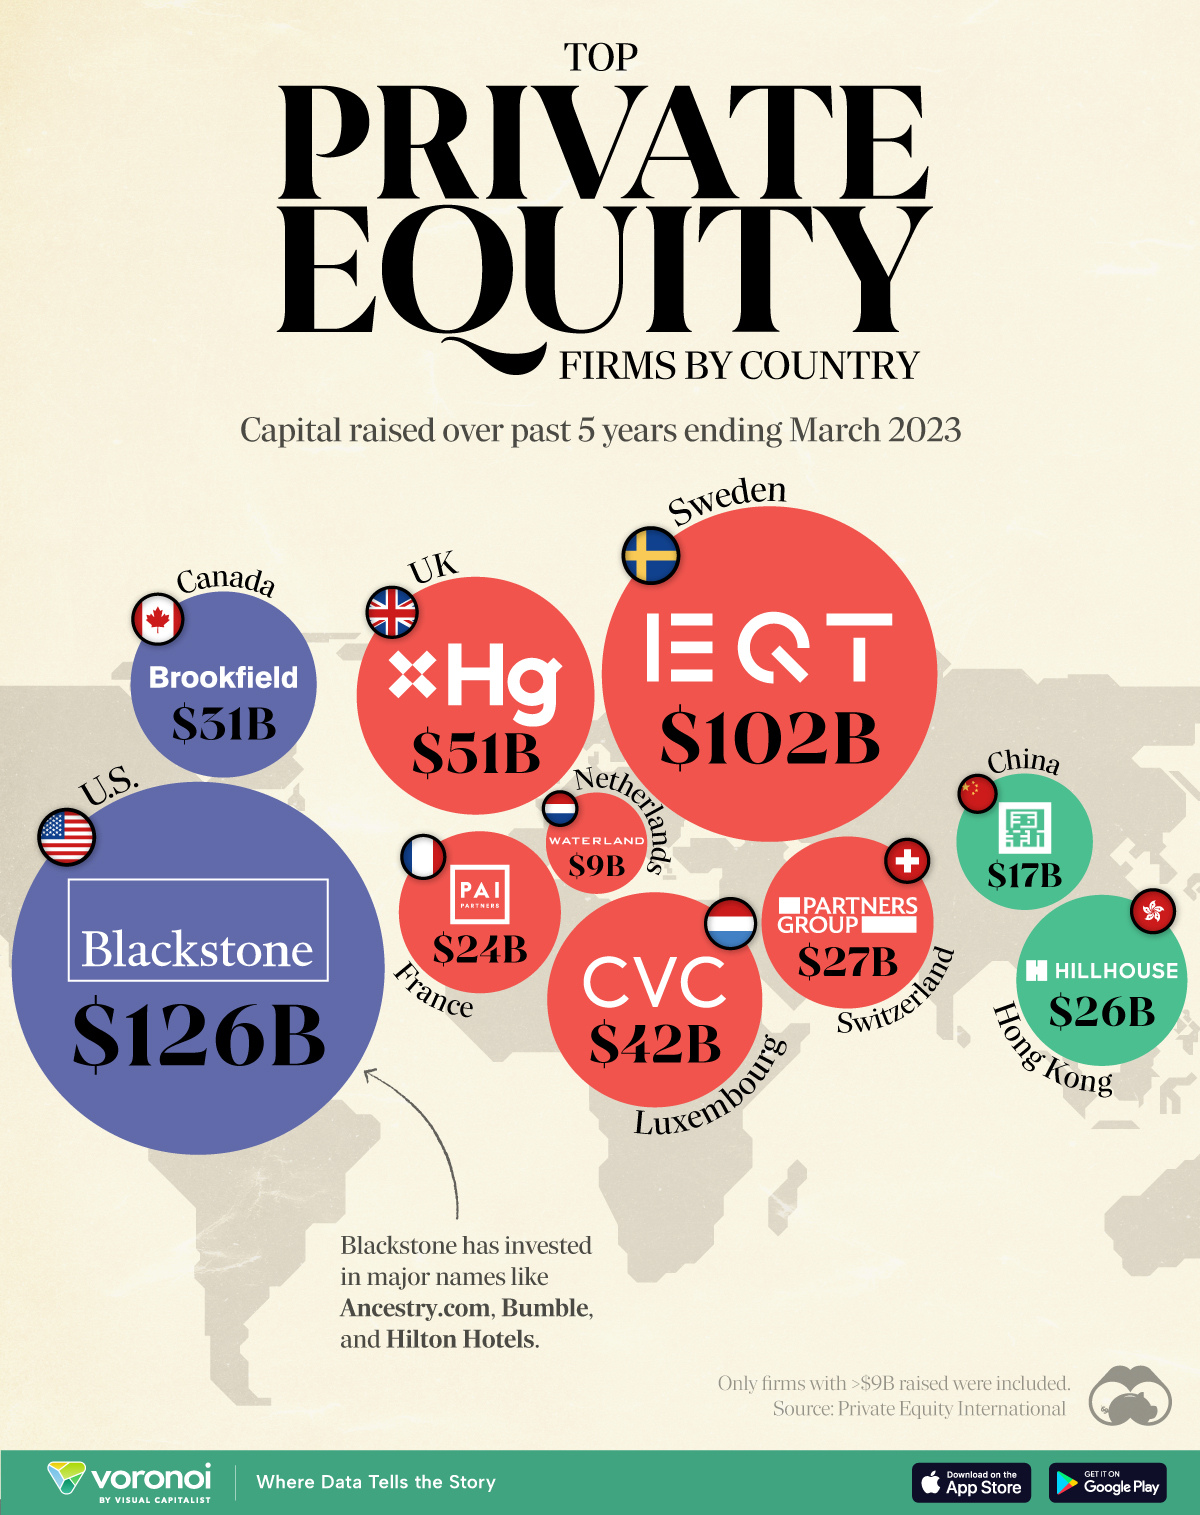 Map showing the top private equity firms of various countries